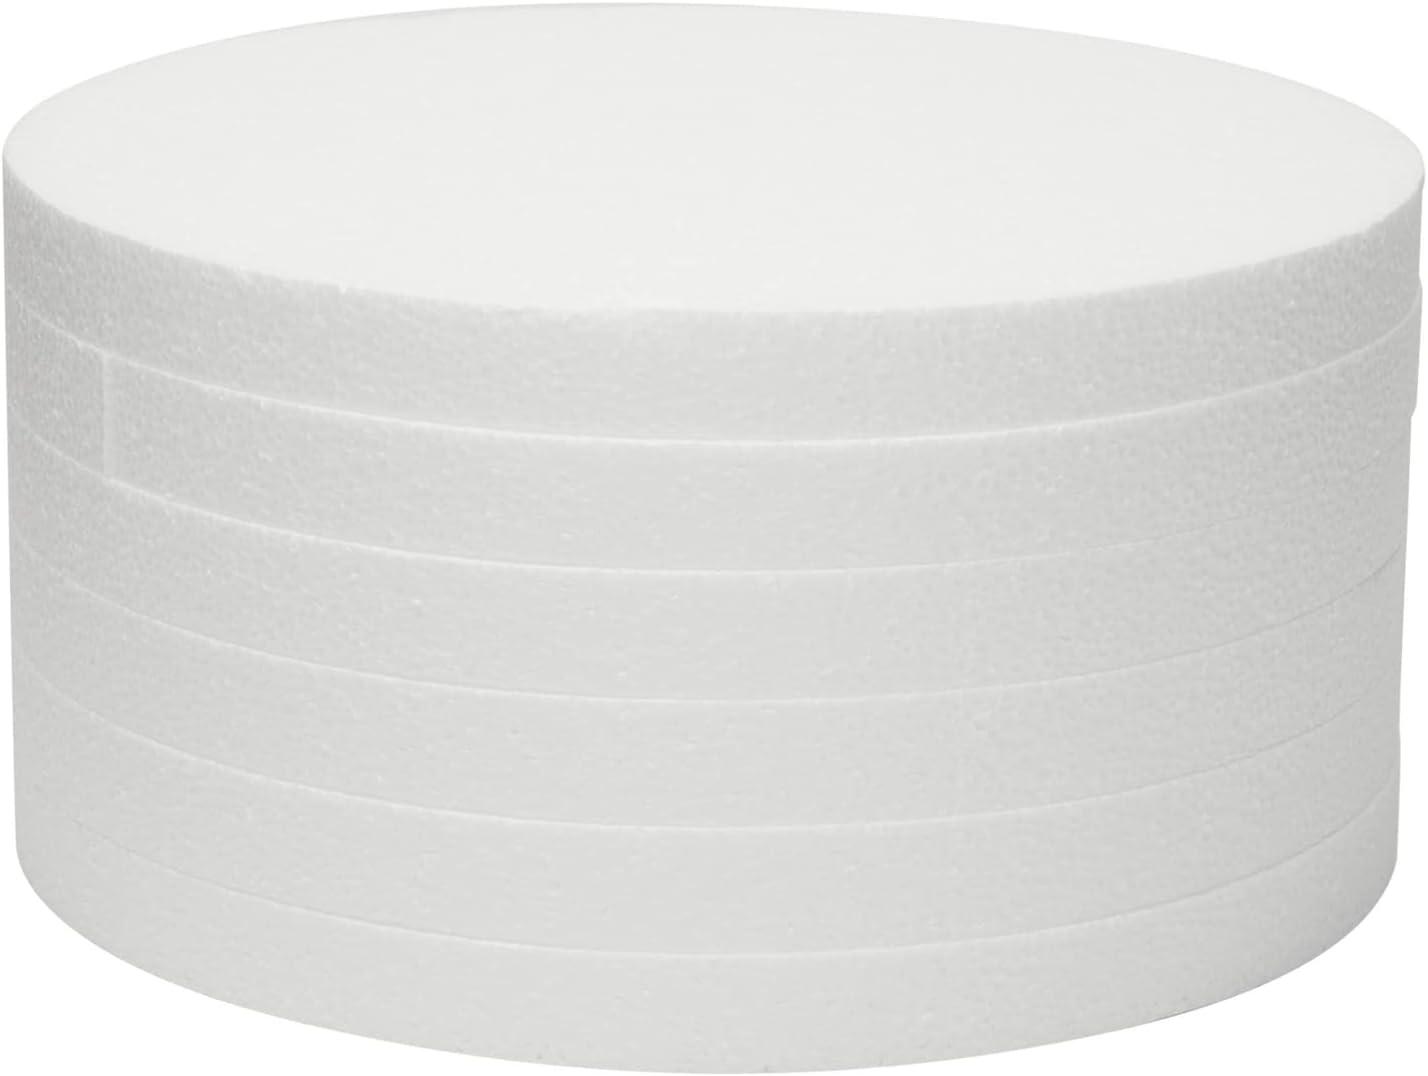 6 Pack 12x12-Inch Round Foam Circles for Crafts 1 Thick for DIY Projects  Decorations (White)